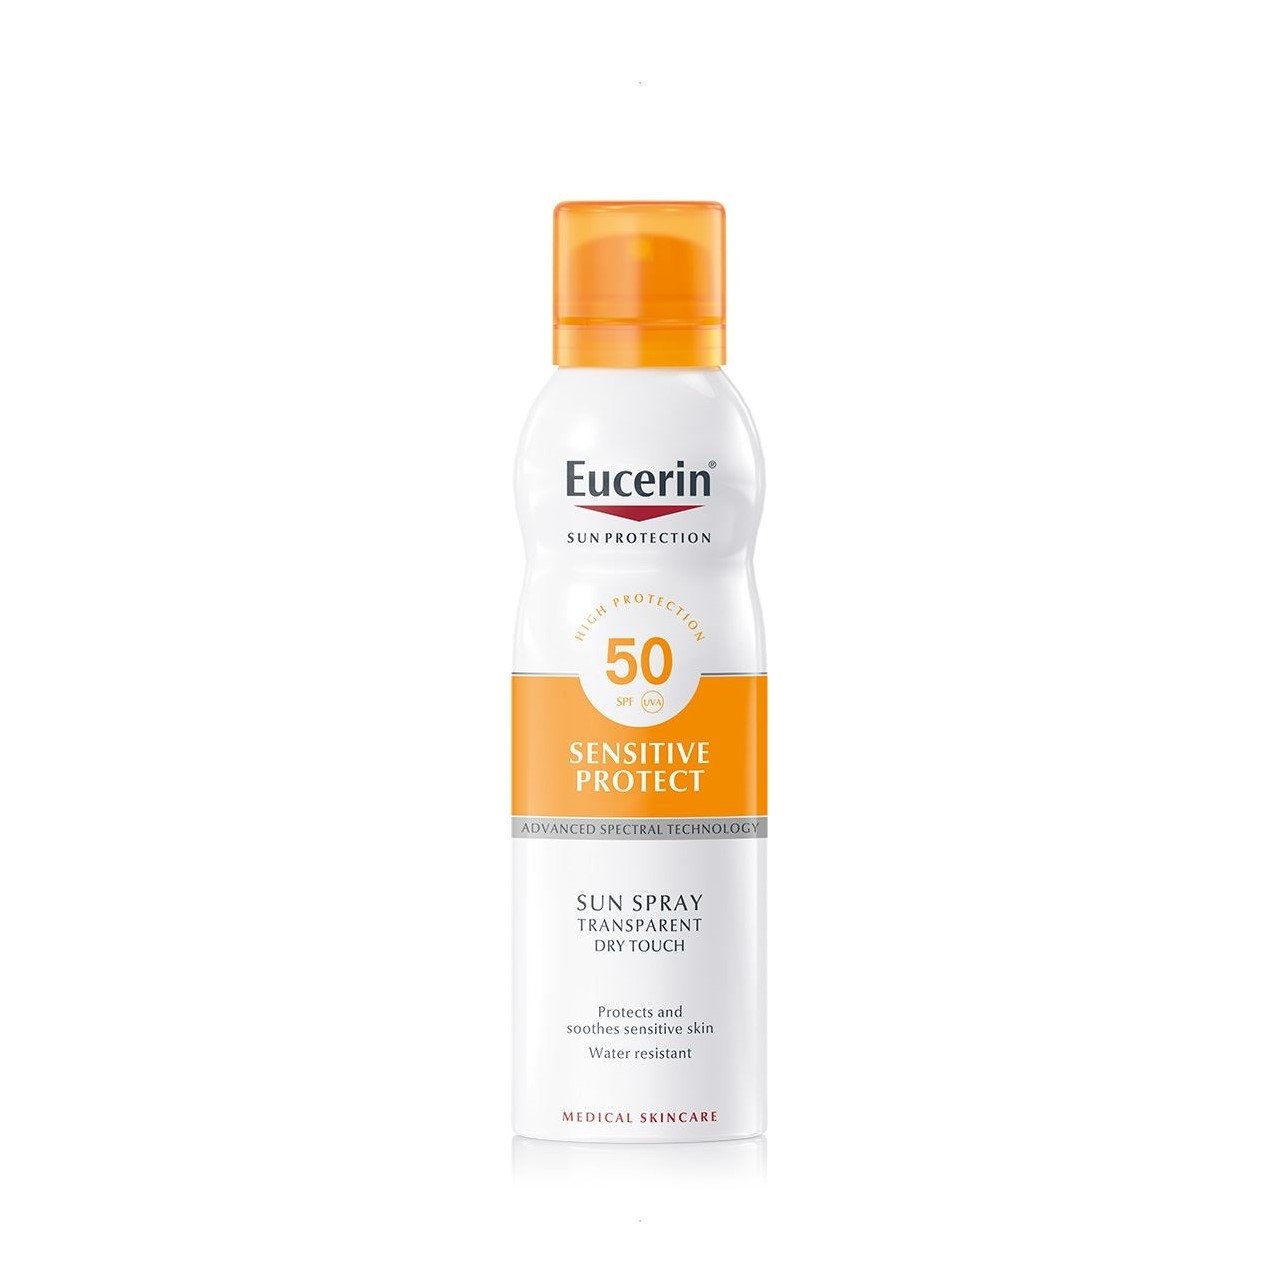 Eucerin dry touch suncream spray for sensitive skin spf 50 Eucerin Sun Sensitive Protect Sun Spray Dry Touch Transparent Spf50 200ml